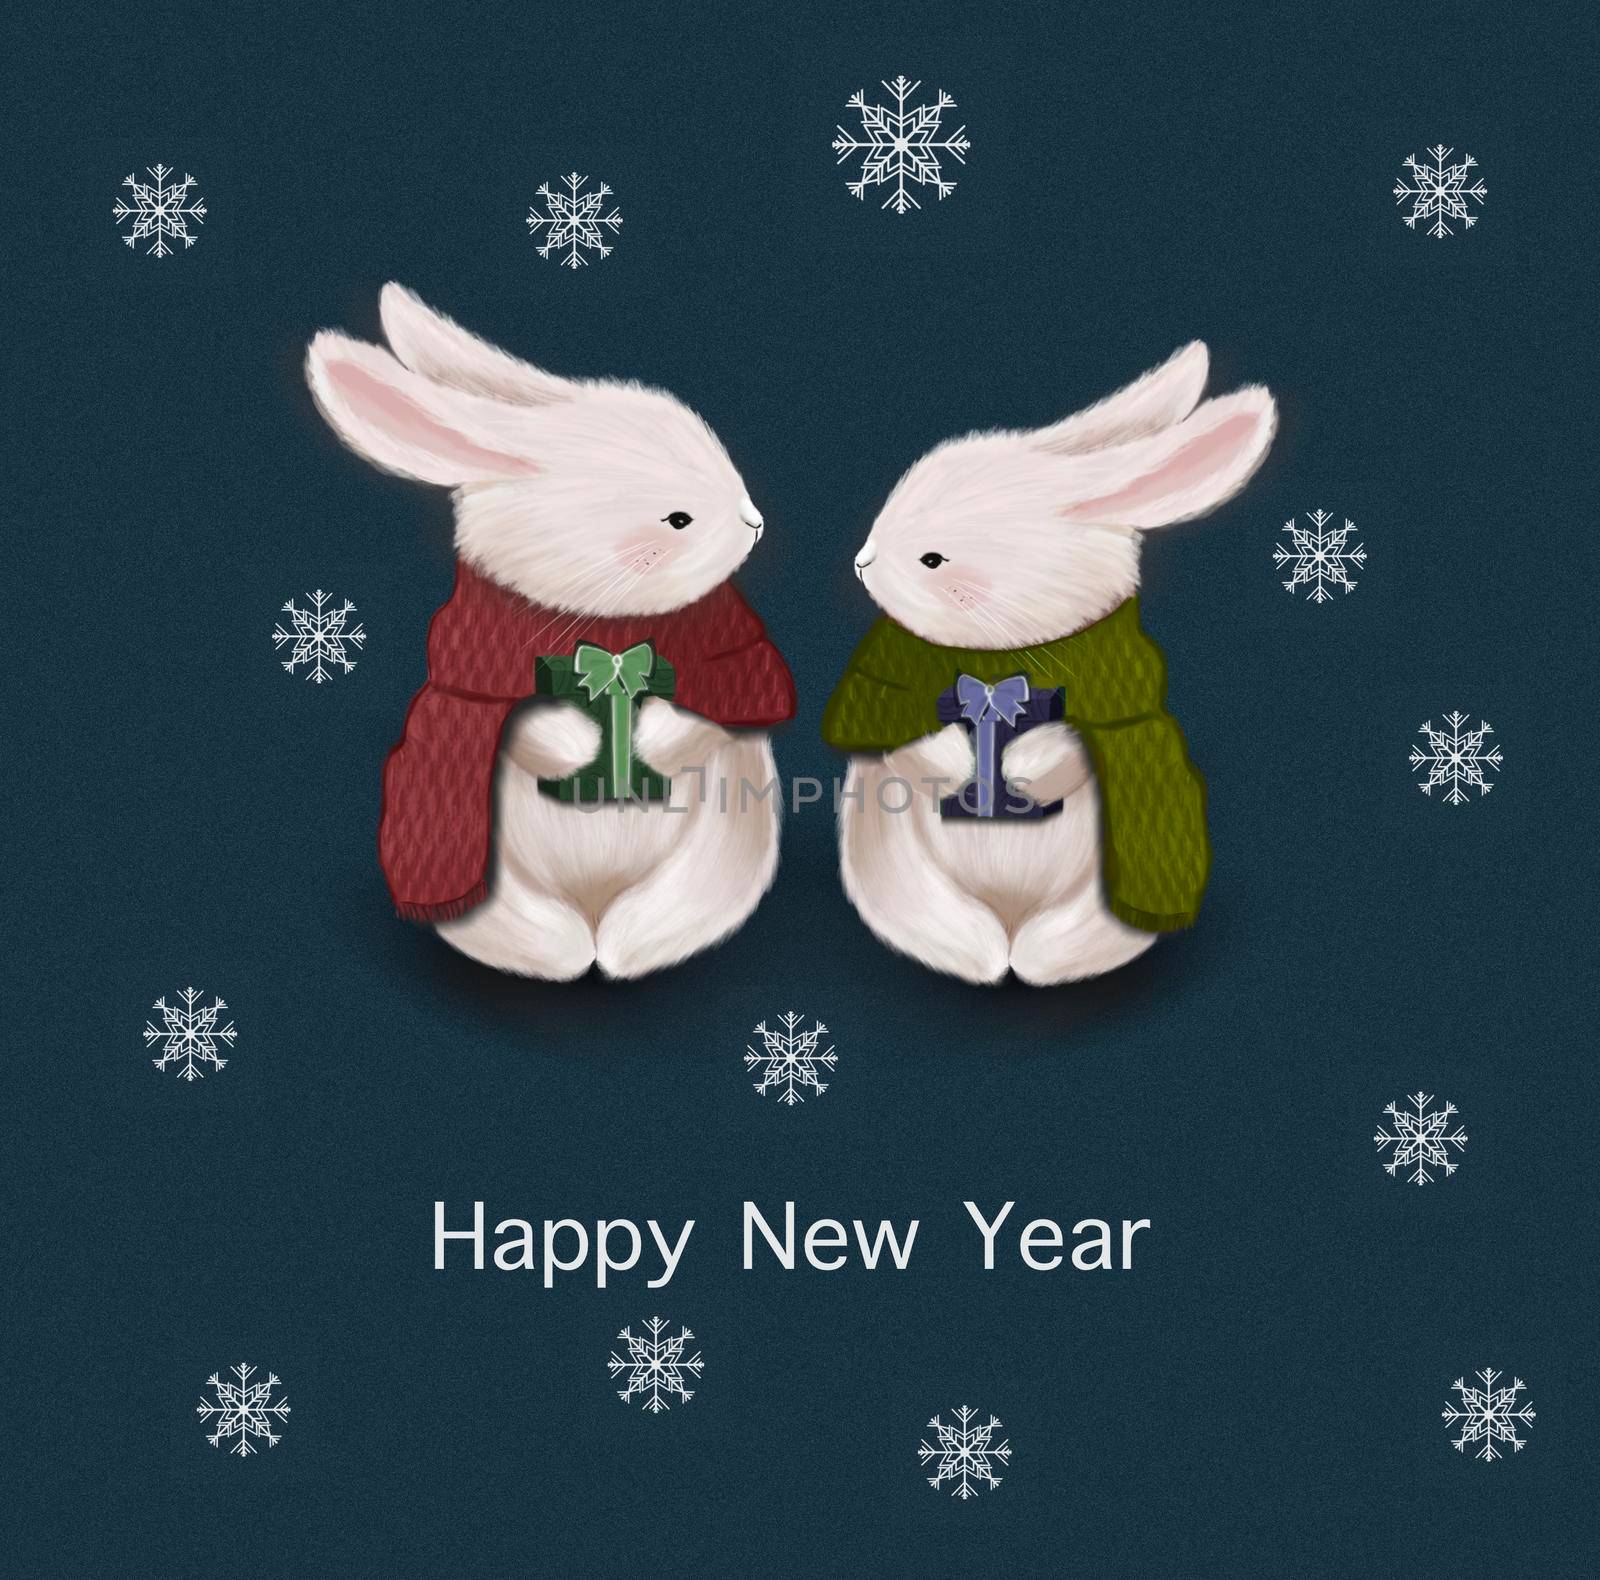 Christmas illustration with cute rabbits. Happy New Year greeting card